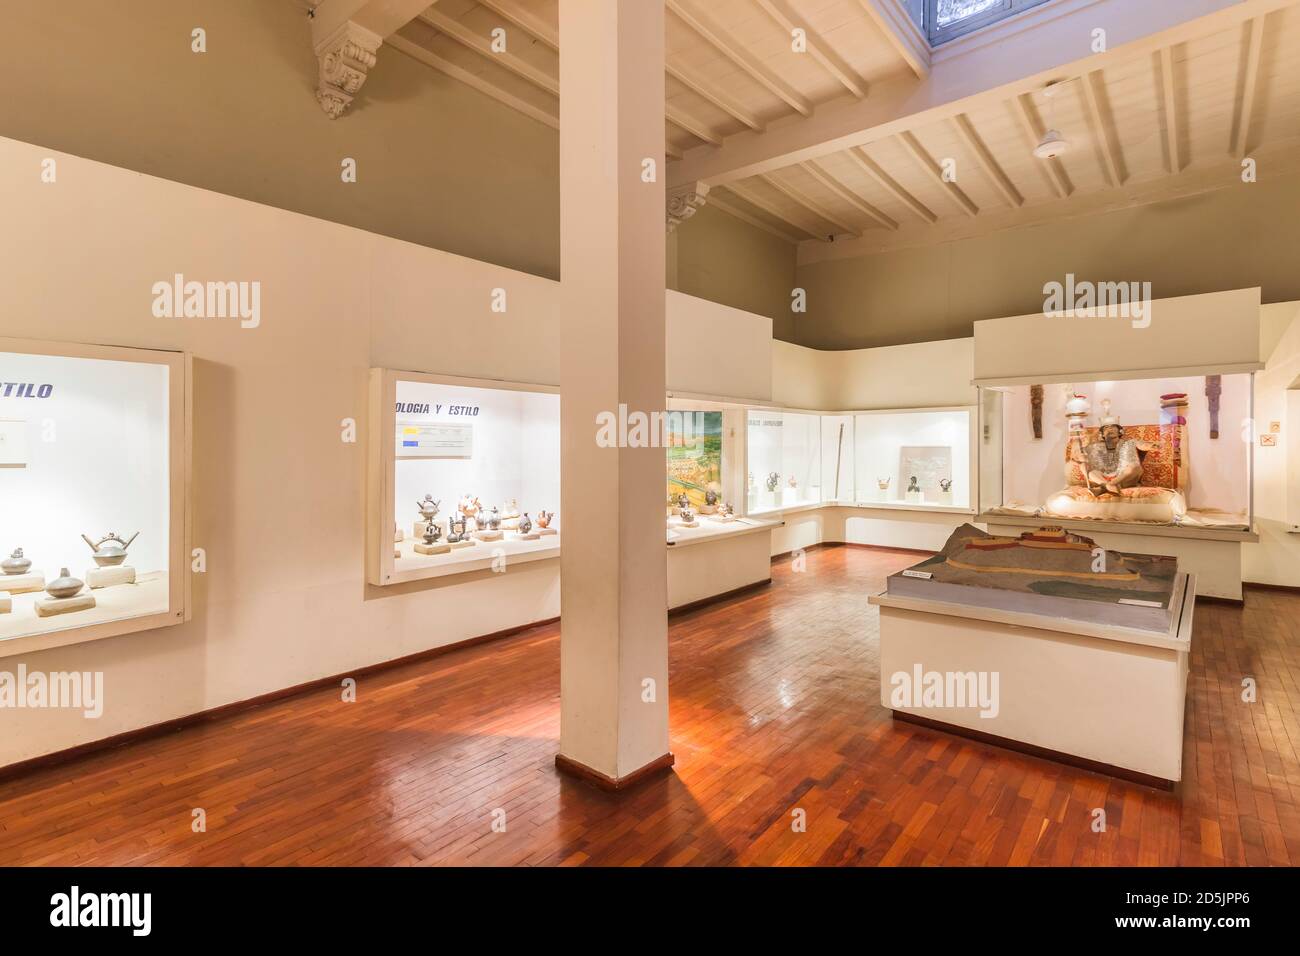 Chimu and Sican culture collection gallery, 'National Museum of Archaeology, Anthropology and History of Peru', Lima, Peru, South America Stock Photo